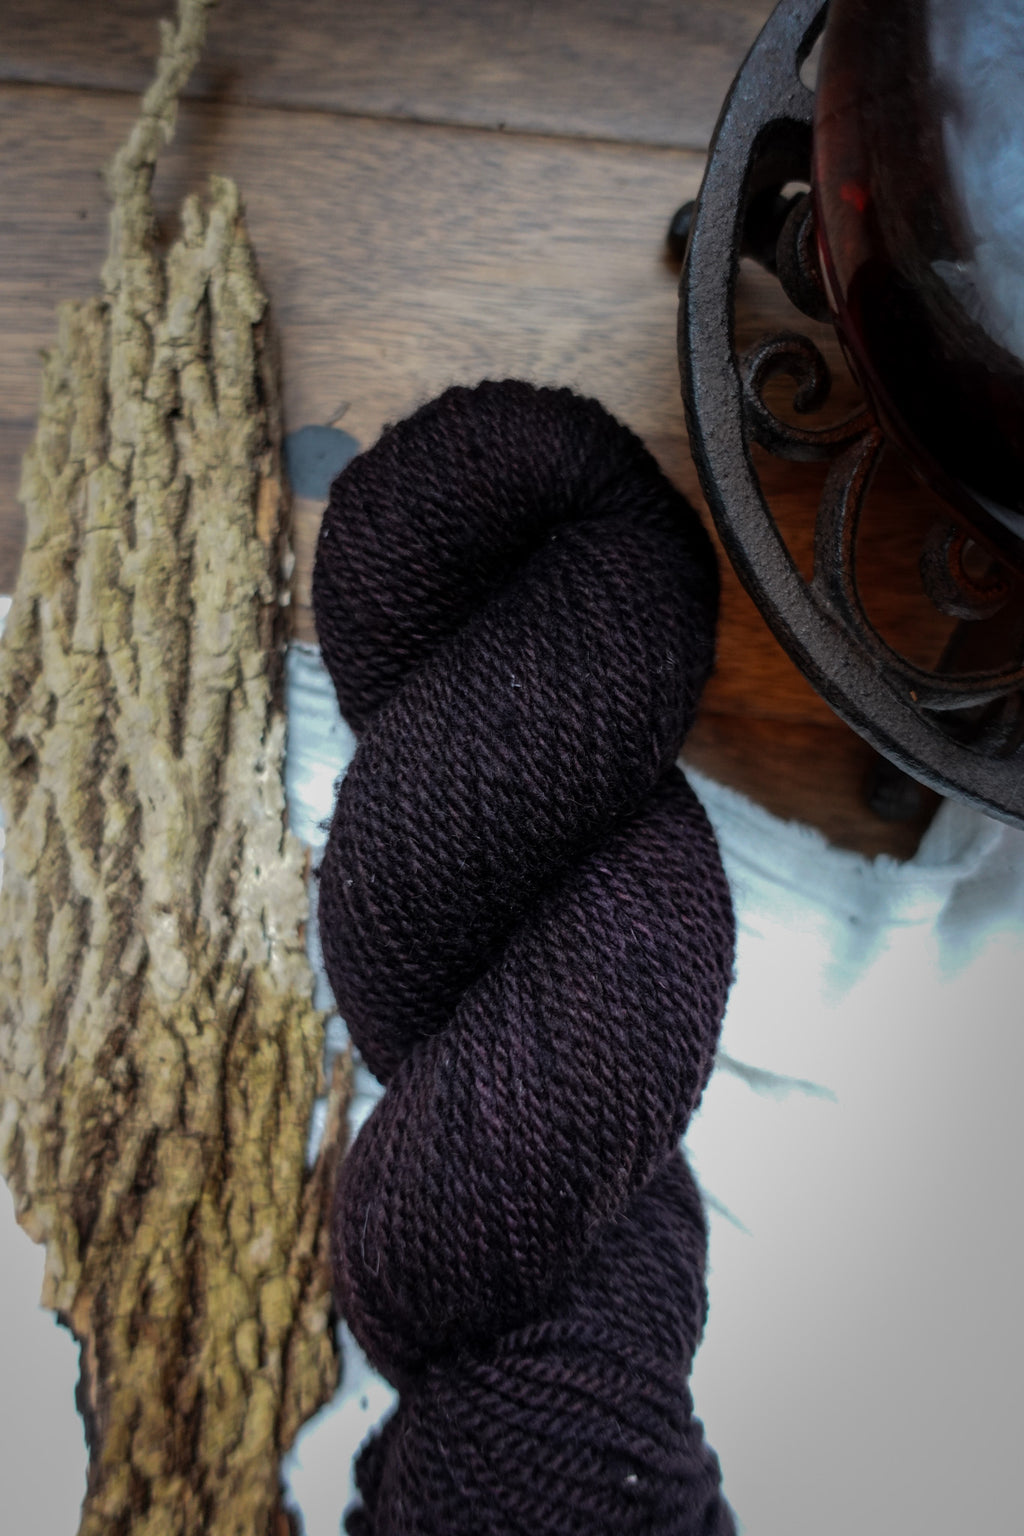 A skein of hand dyed, dark burgundy yarn lays on a tabletop next to some bark and a teapot.